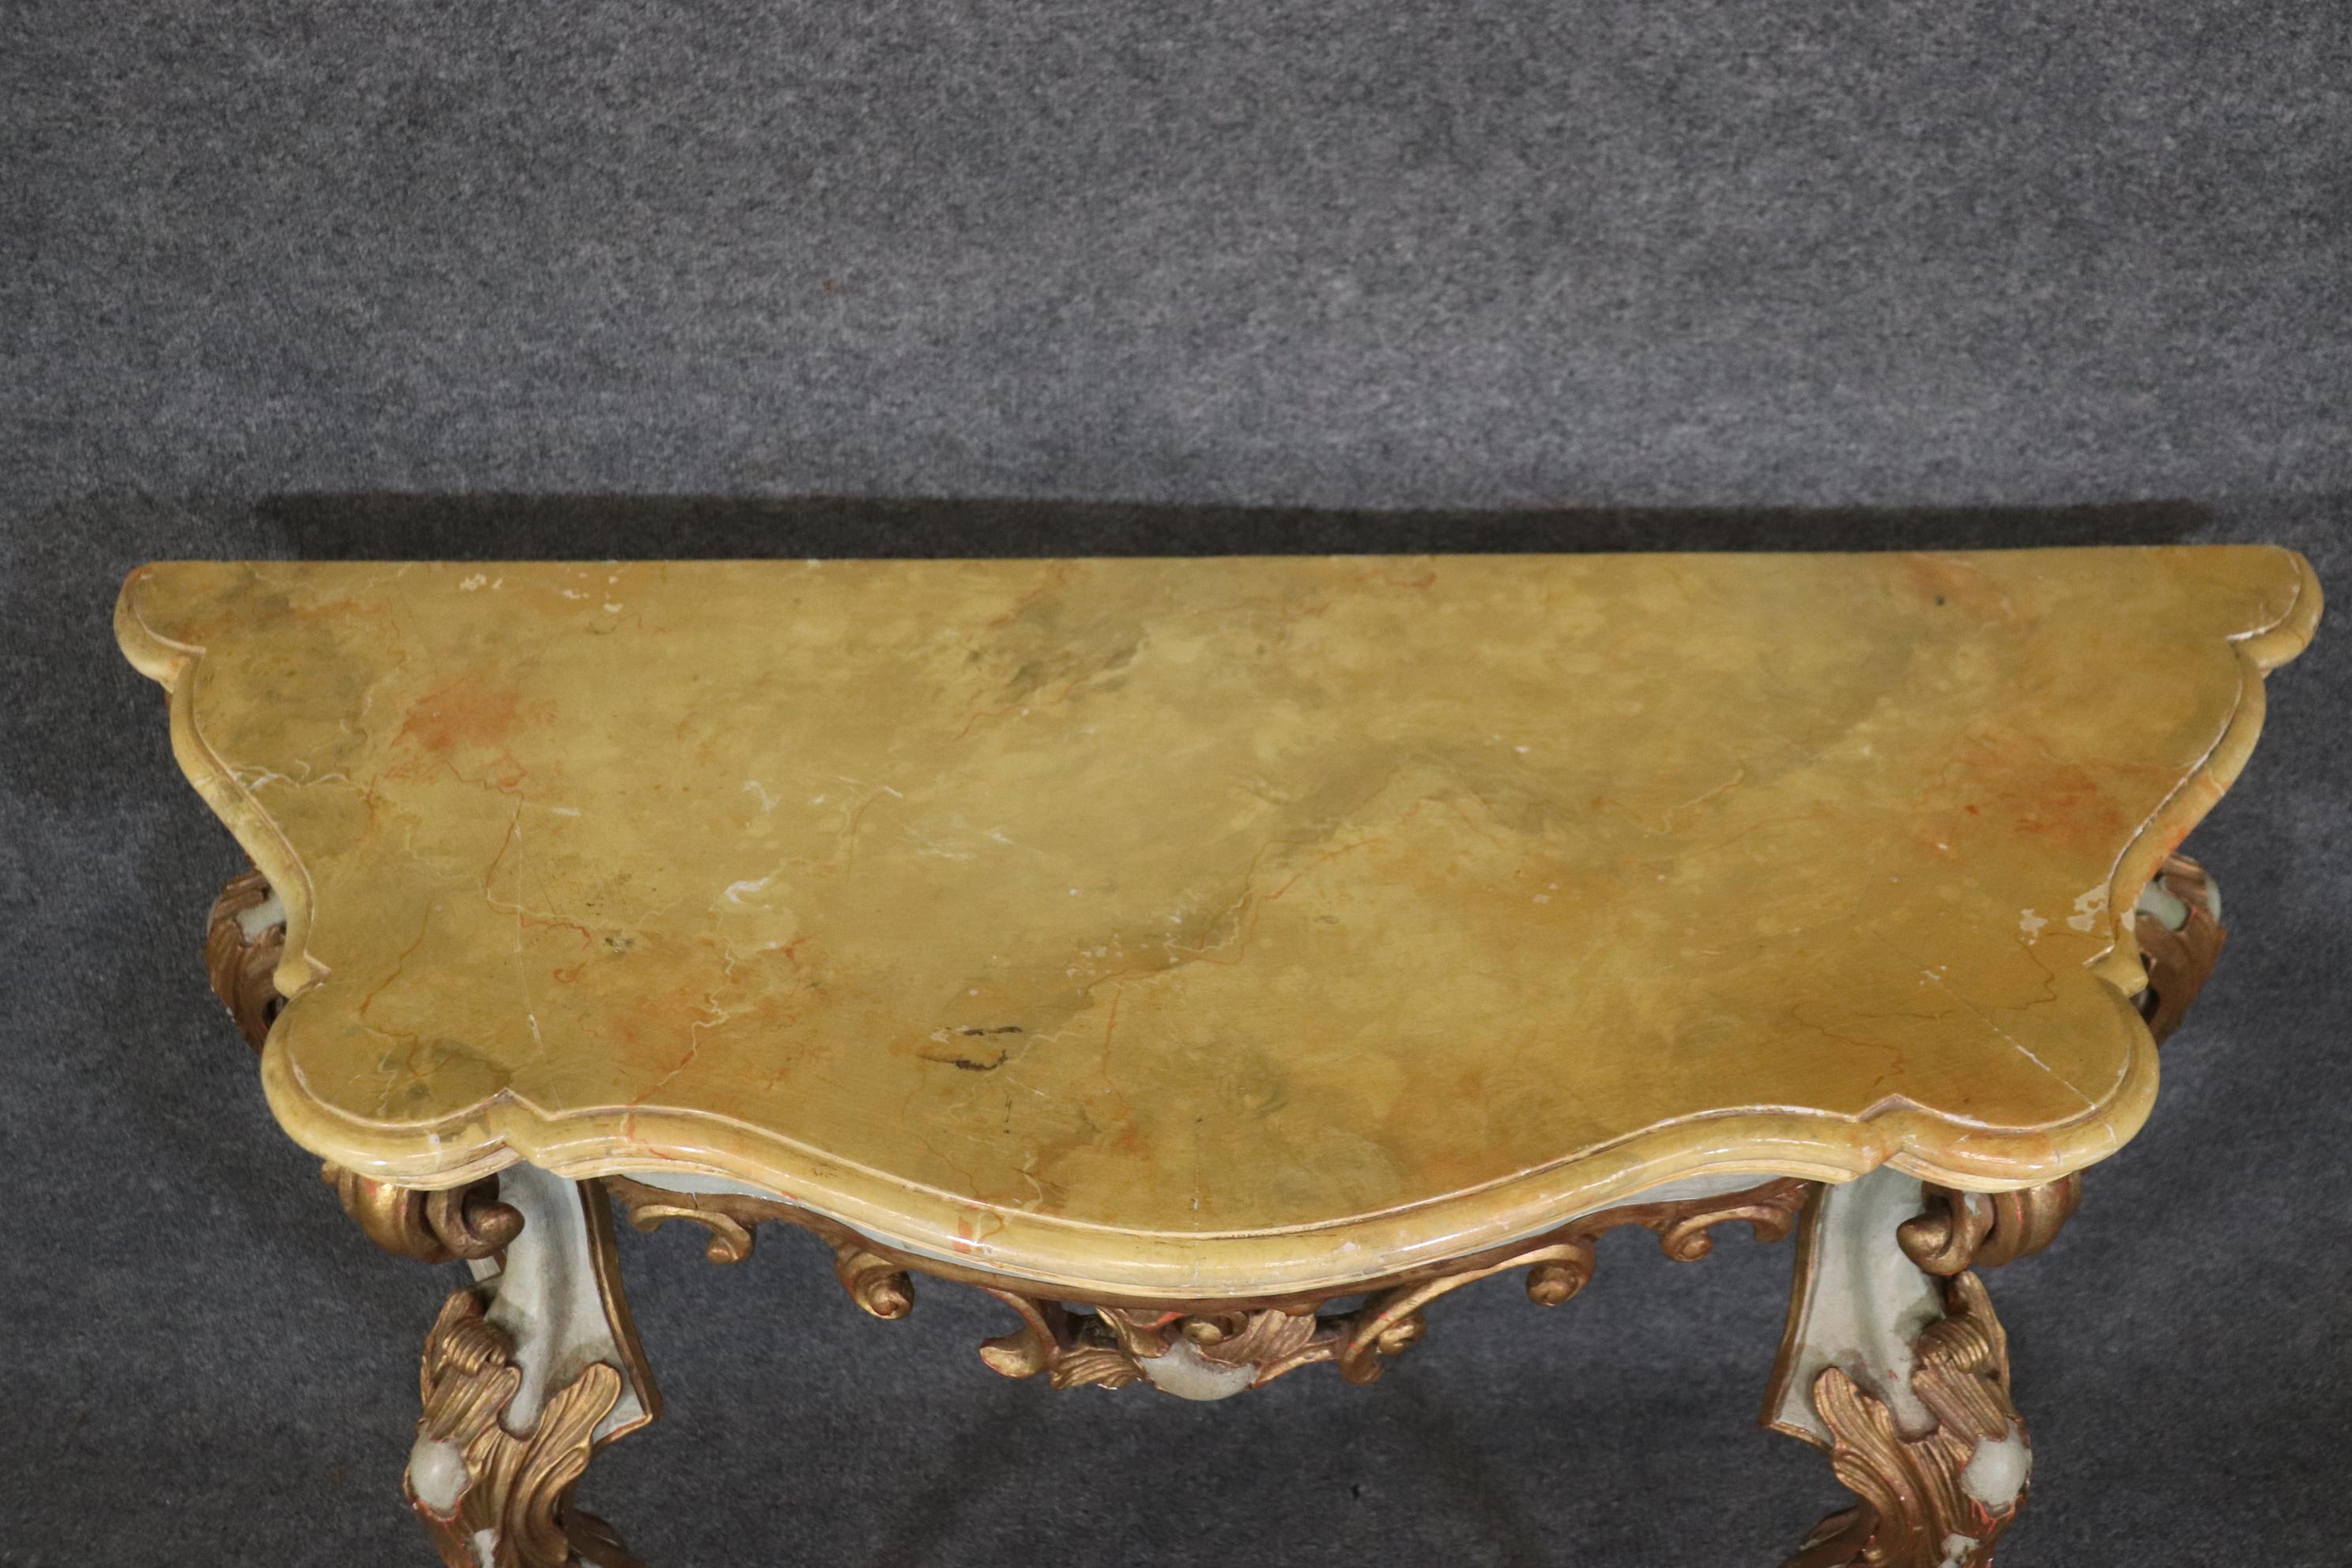 This is a superb pair of paint-decorated Italian-made Rococo console tables. The tables feautures beautifully painted faux marble tops. The tables feature a glorious paint scheme including gilding and various hues of ochres, and pastels. The tables